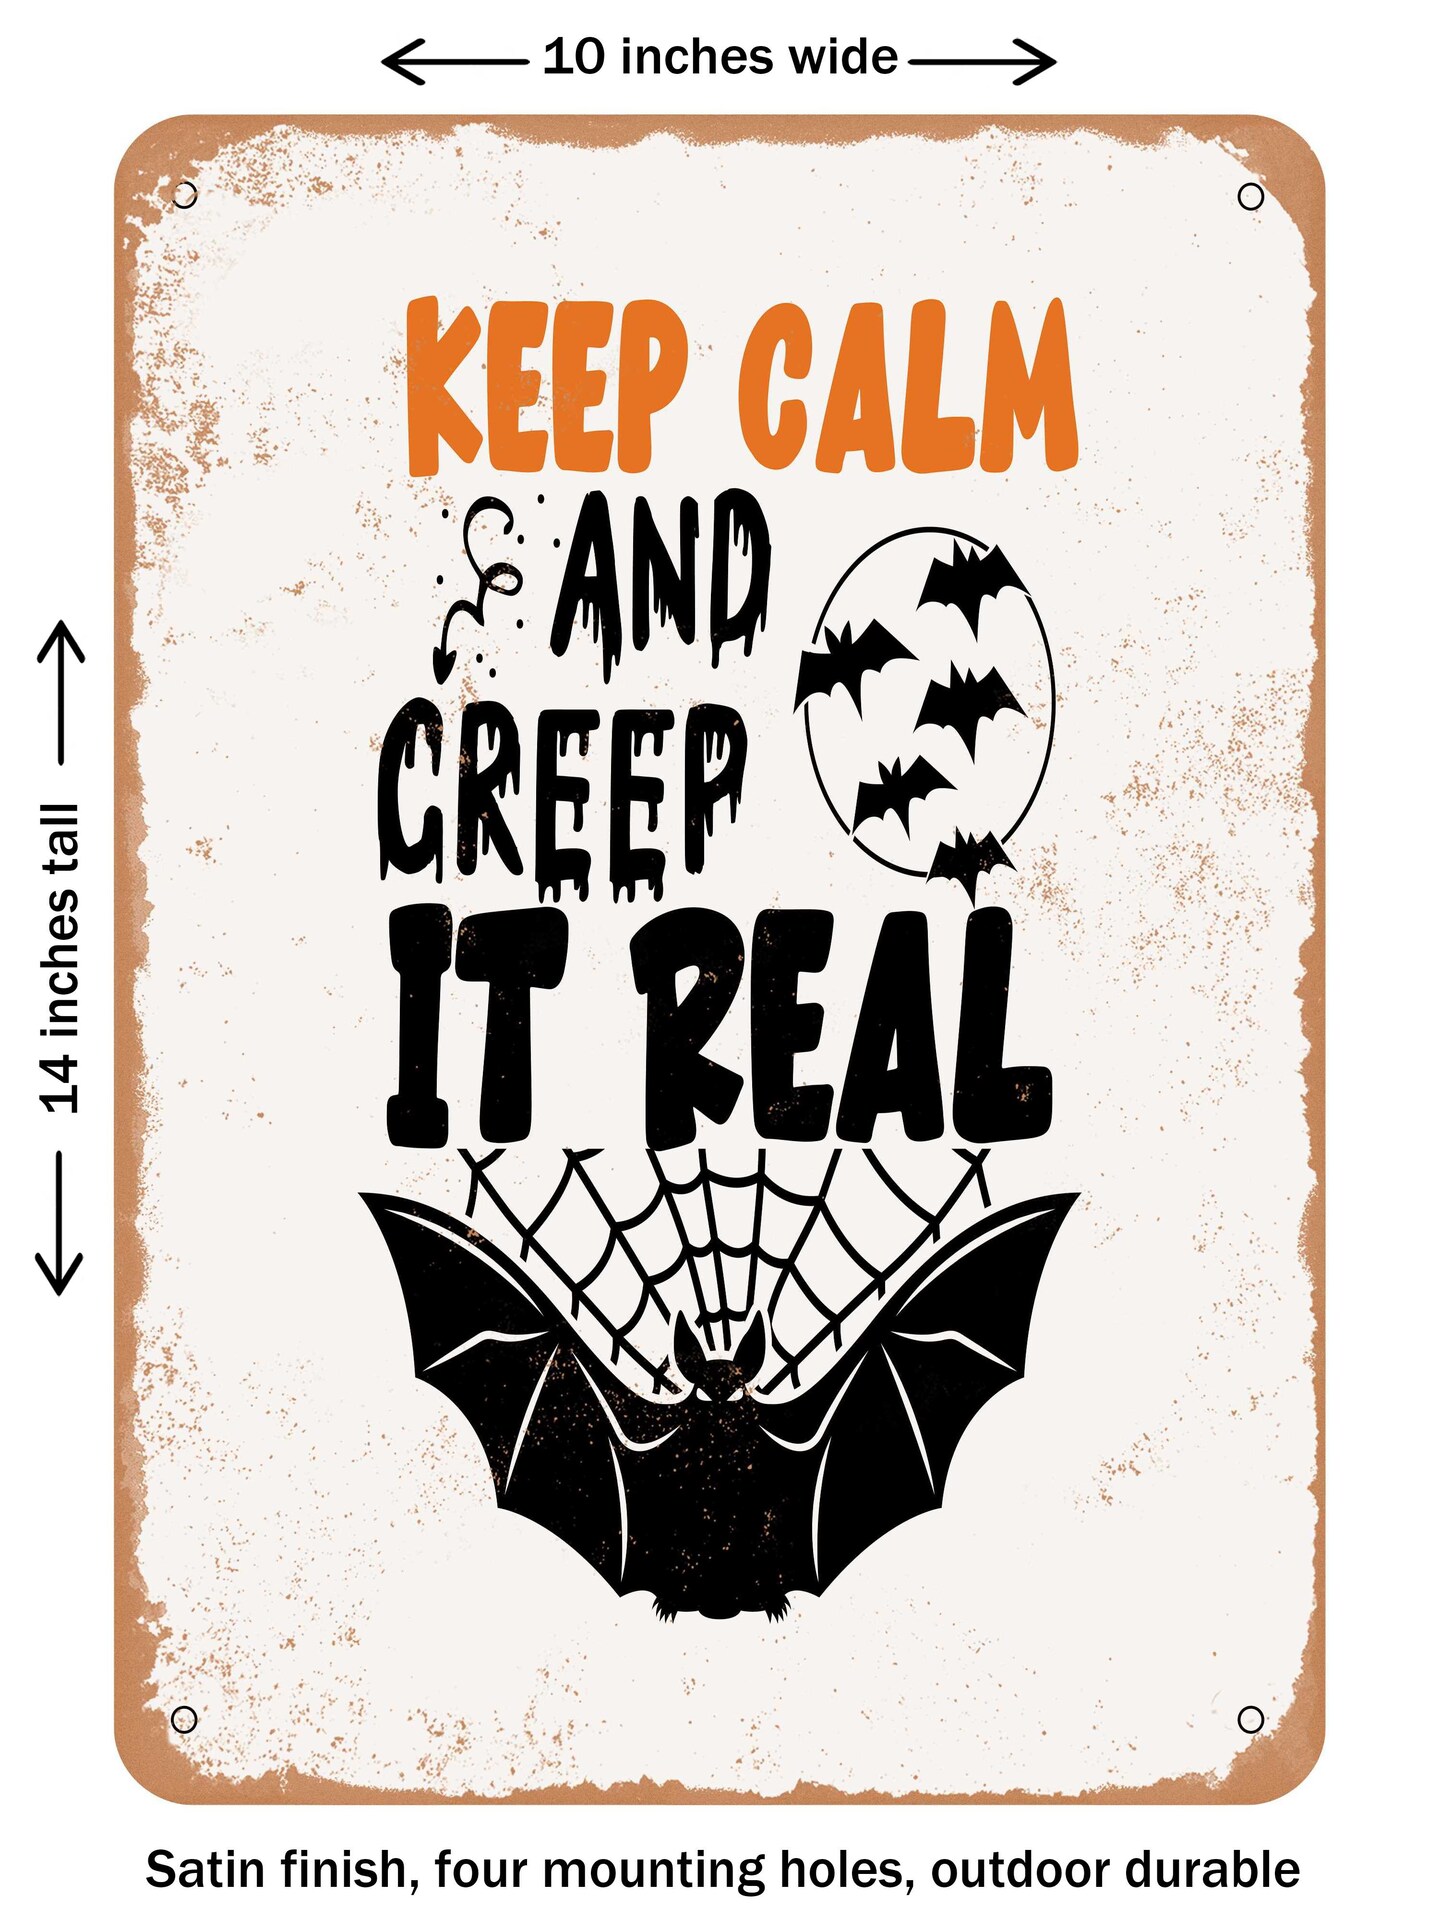 DECORATIVE METAL SIGN - Keep Calm and Creep It Real  - Vintage Rusty Look